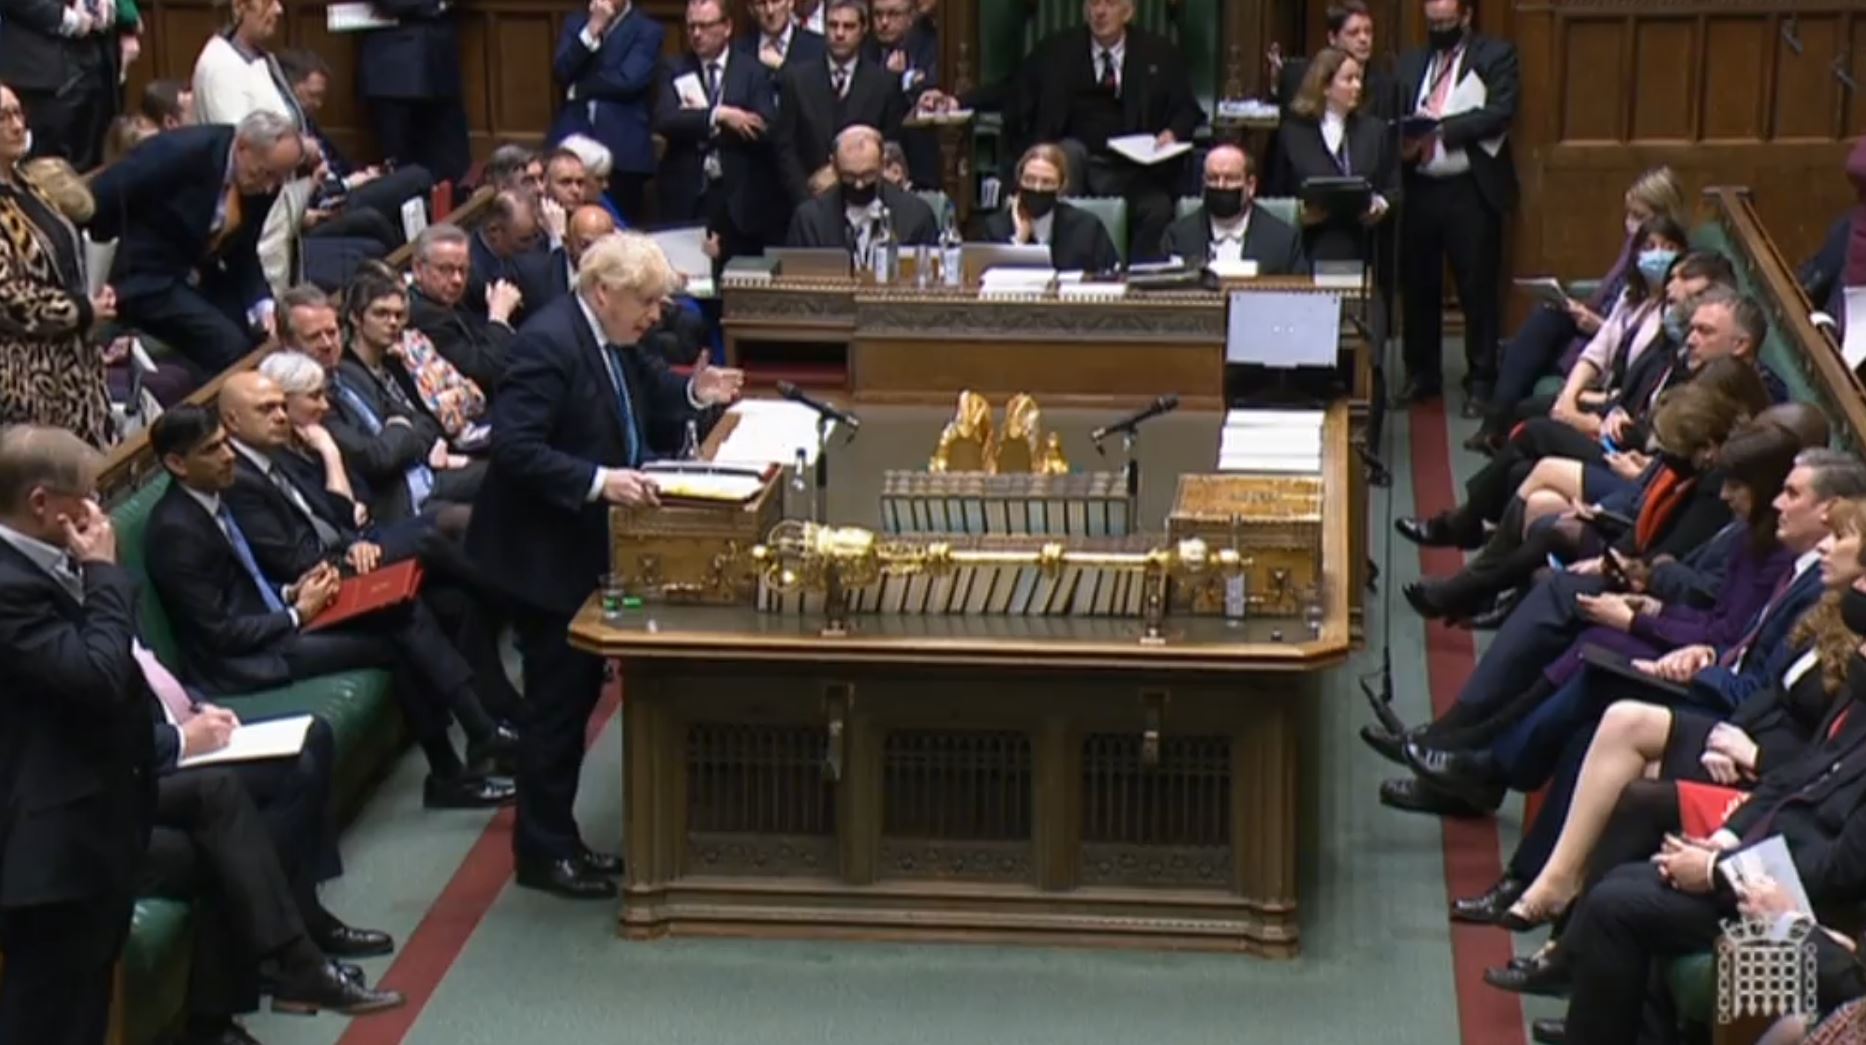 Prime Minister Boris Johnson speaks during Prime Minister's Questions in the House of Commons, London, on February 23. 